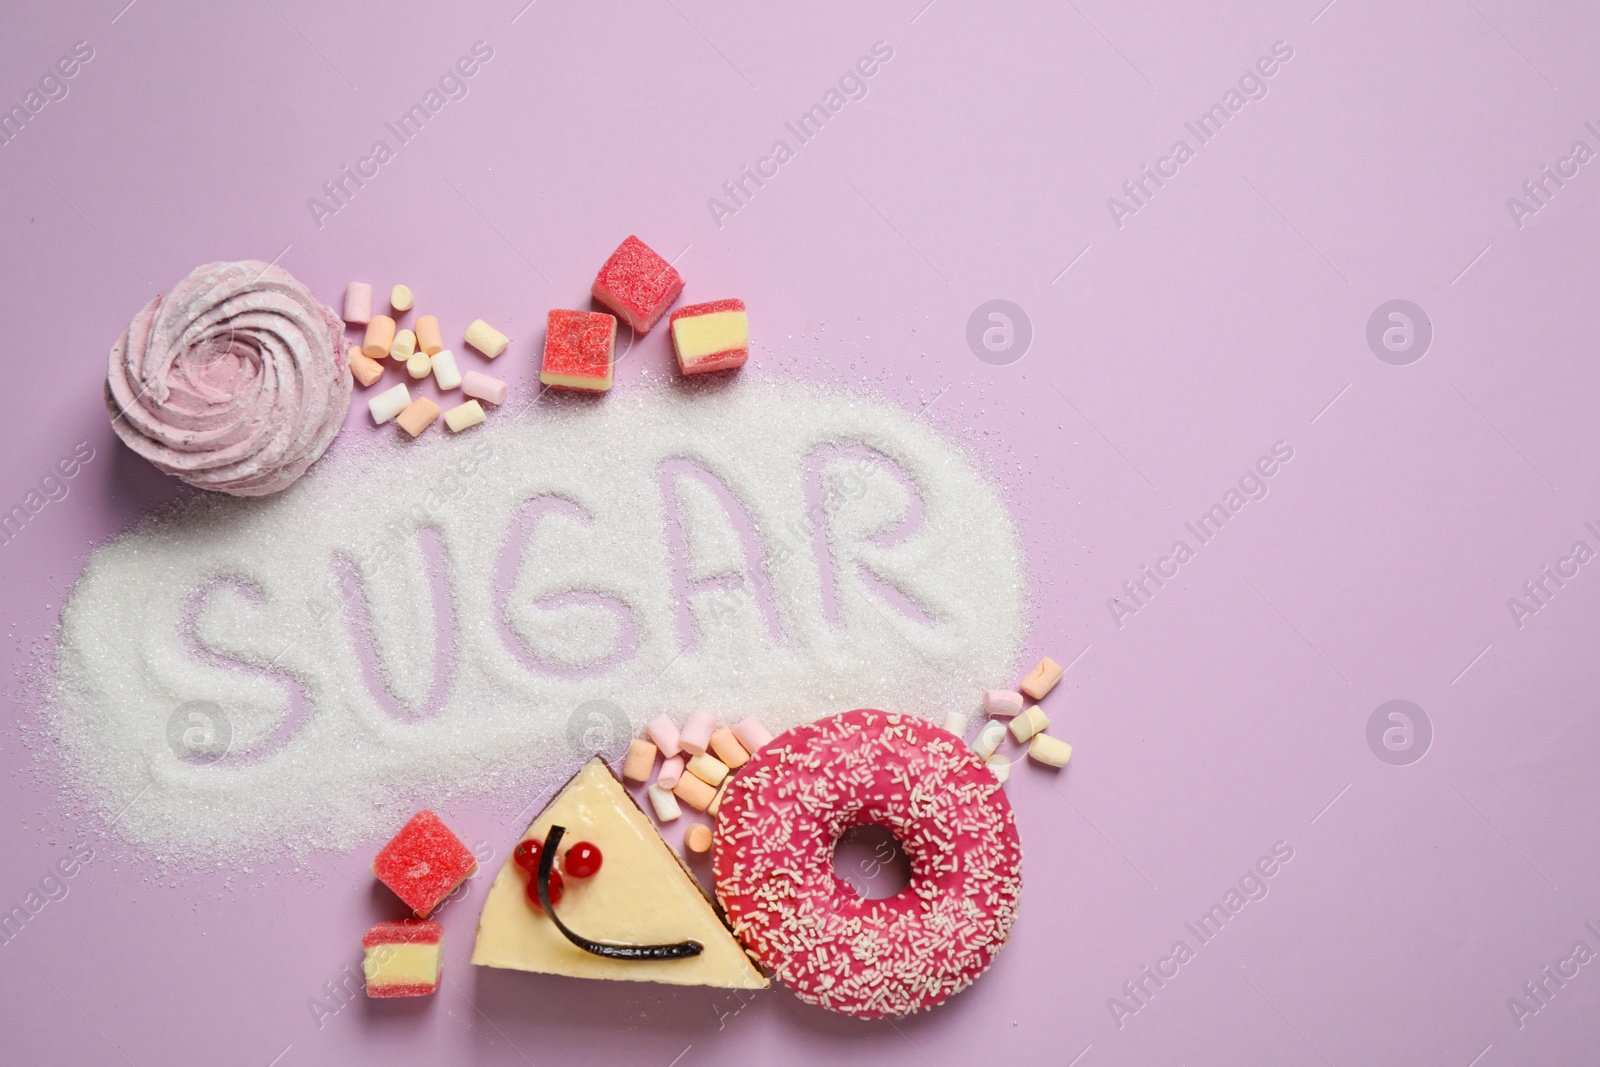 Photo of Flat lay composition with sweets and word SUGAR on lilac background